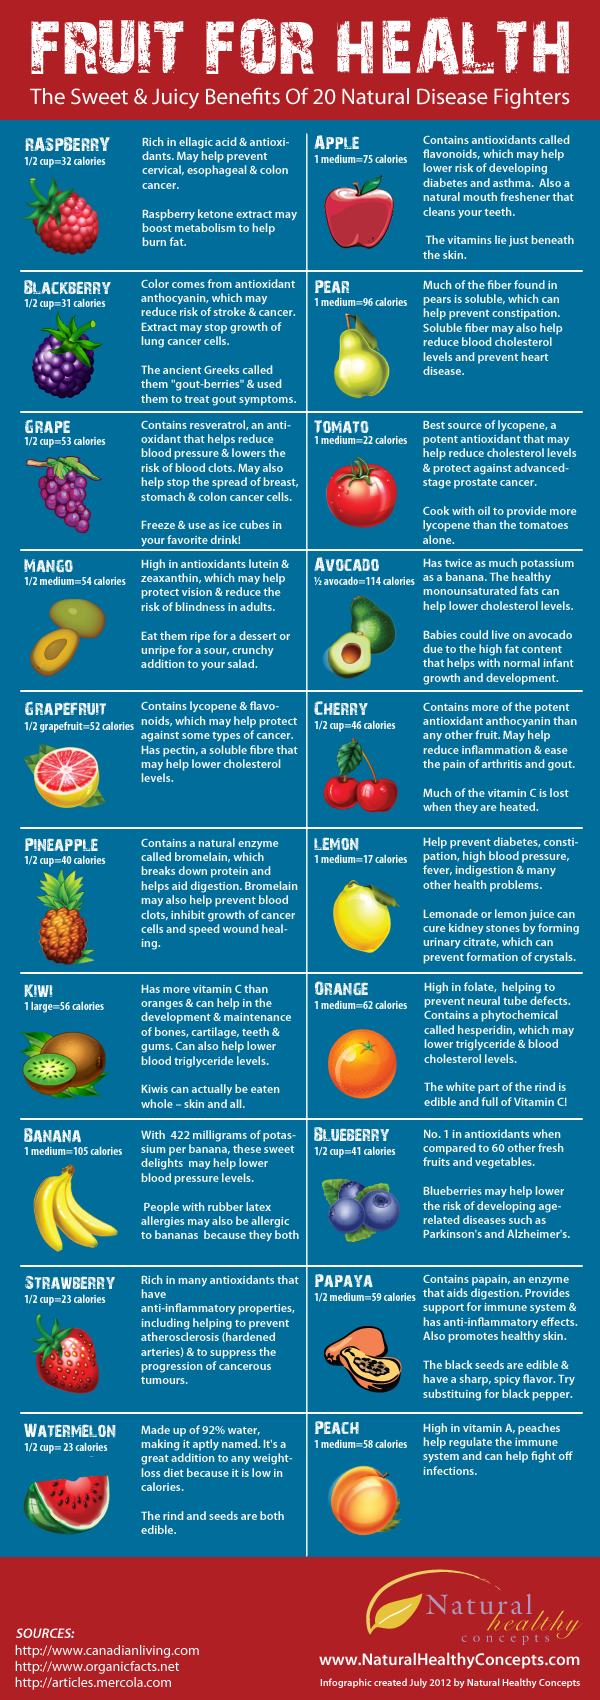 Fruit-For-Health_Infographic